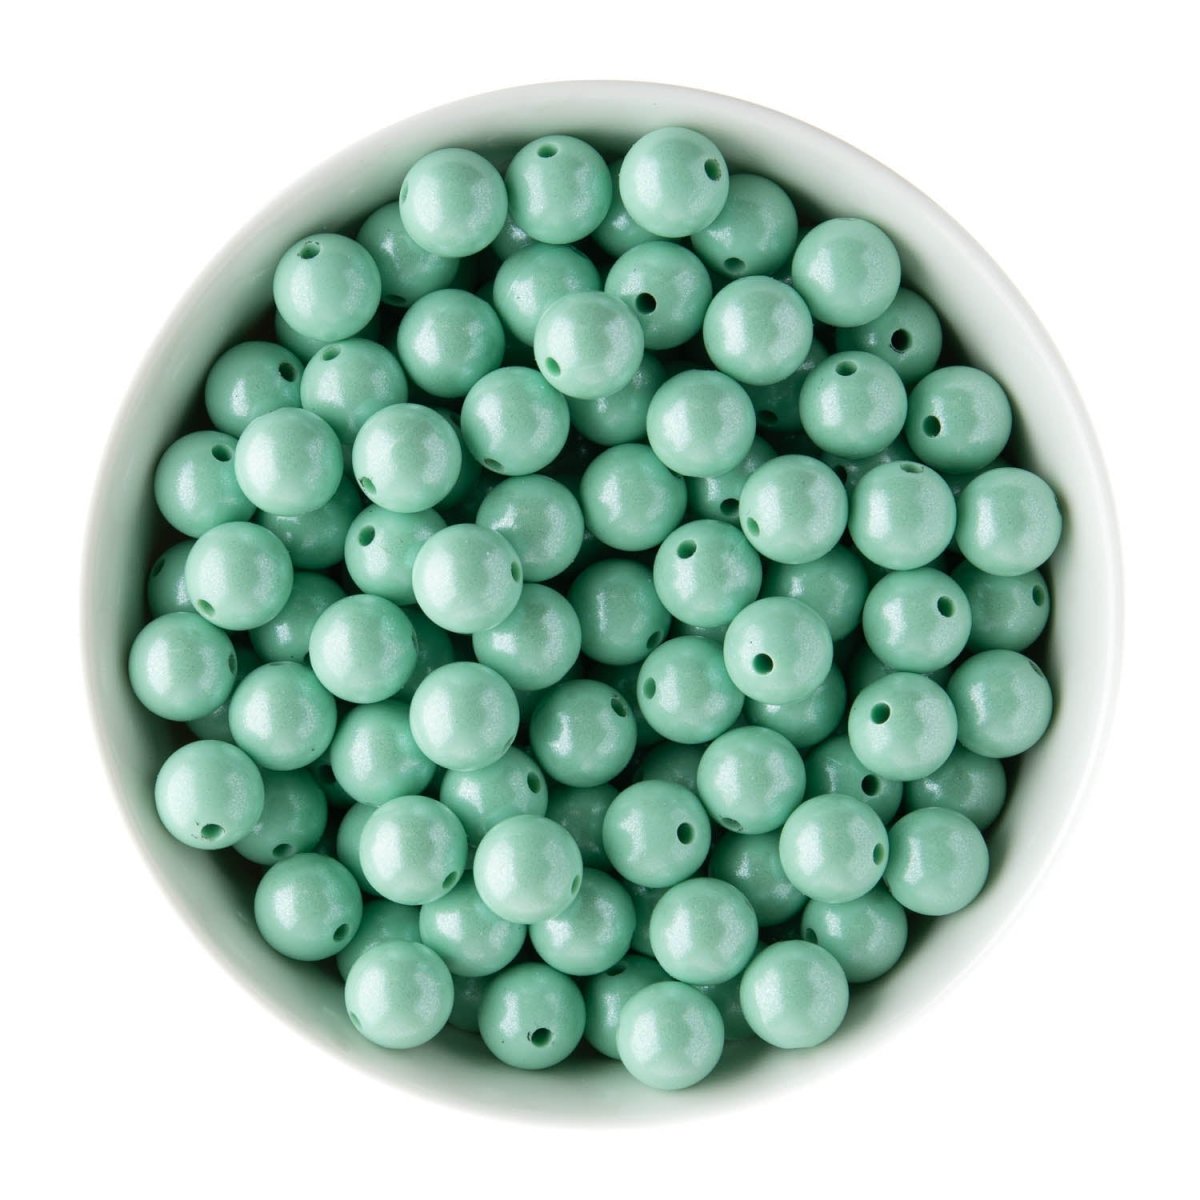 Silicone Round Beads 12mm Opal Mint from Cara & Co Craft Supply